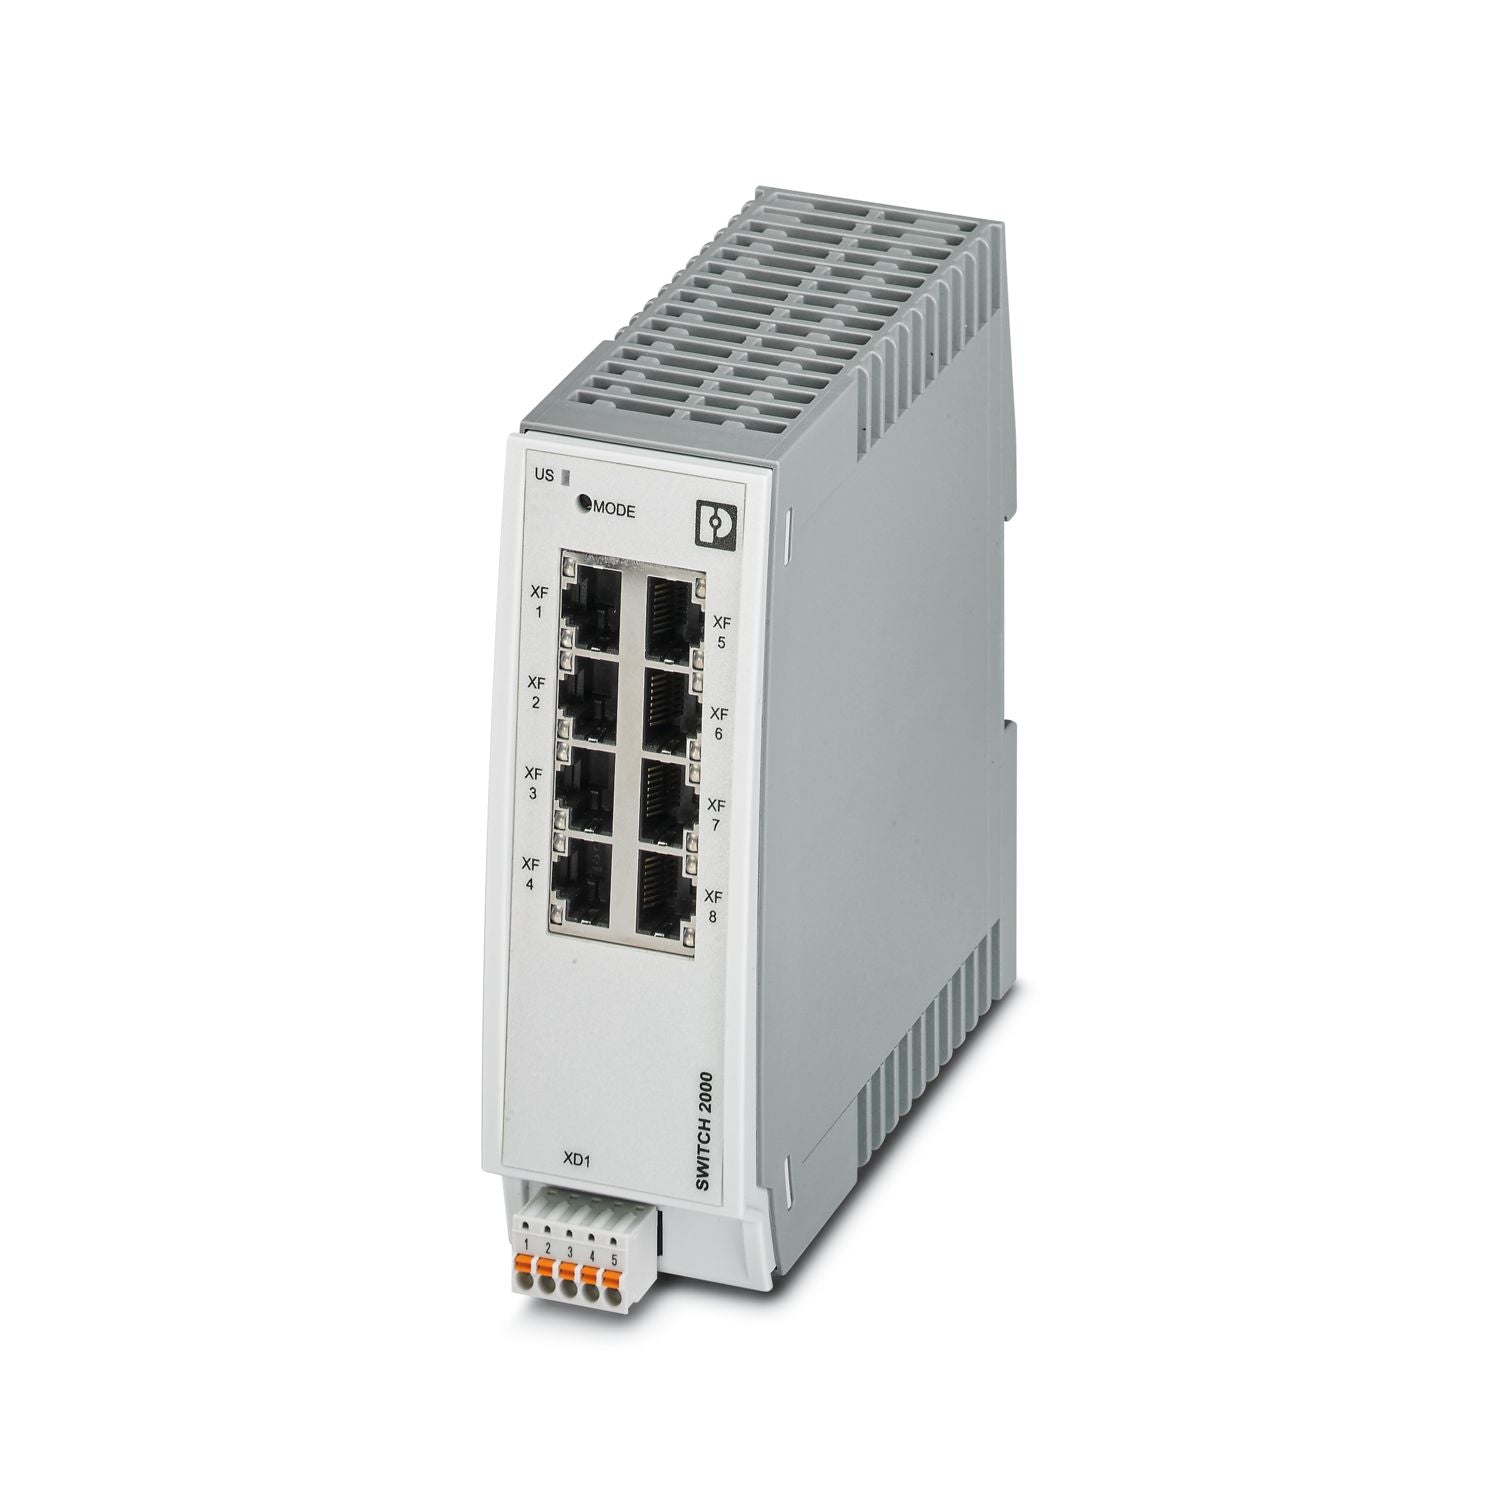 2702324 | Phoenix Contact | Industrial Ethernet Switch